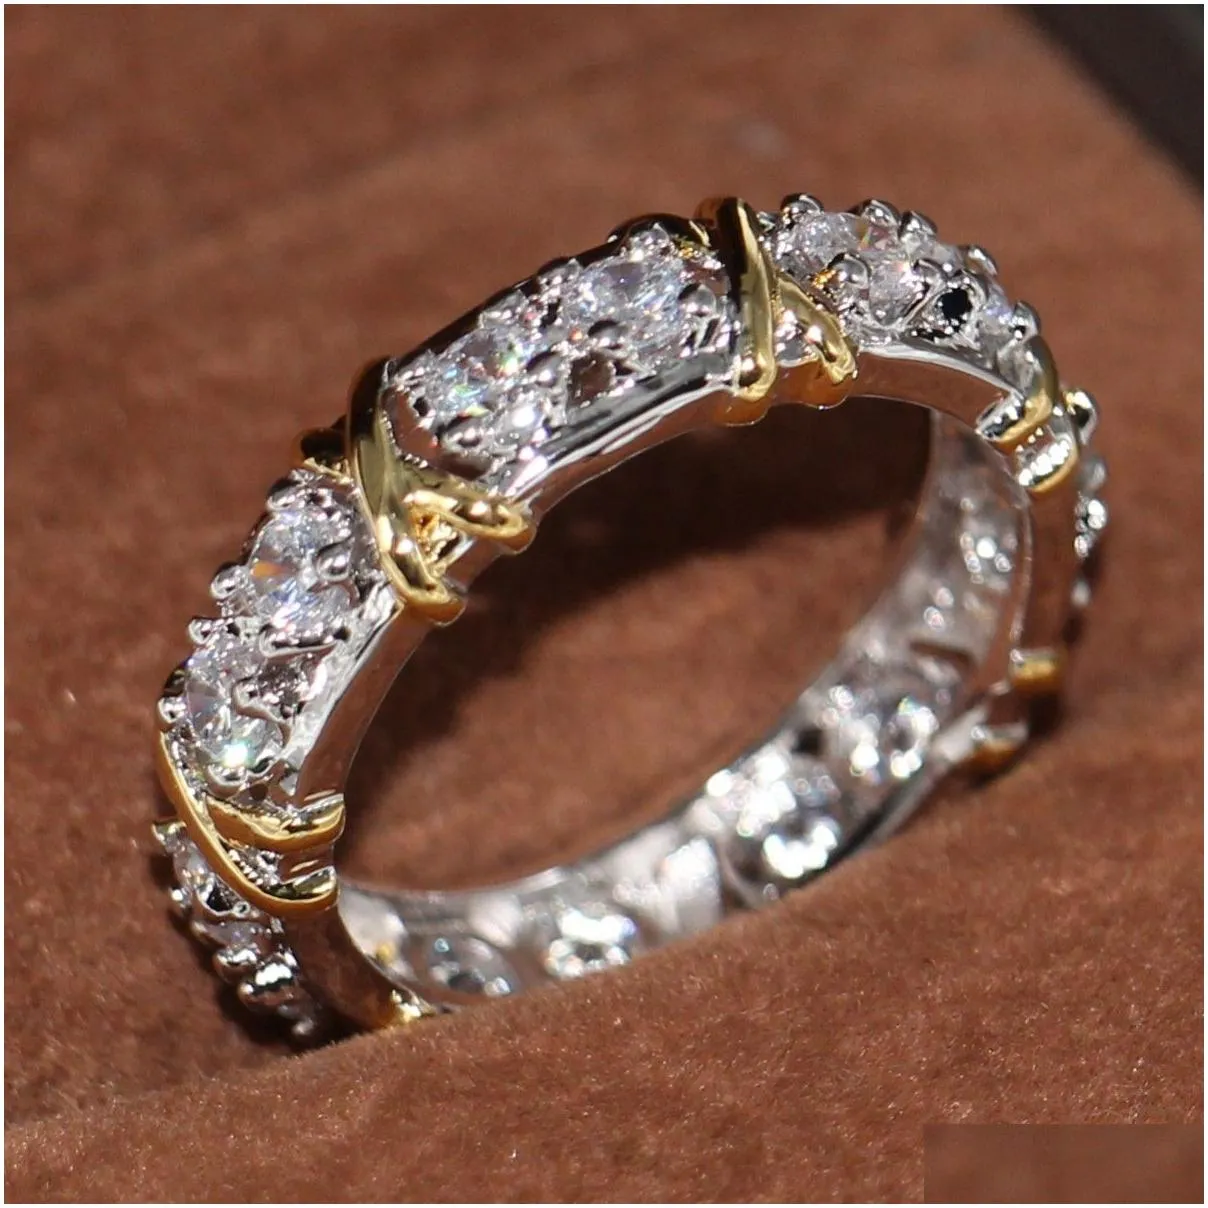 Wedding Rings Wholesale Professional Eternity Diamonique Cz Simated Diamond 10Kt White Yellow Gold Filled Wedding Band Cross Ring Size Dhdmh